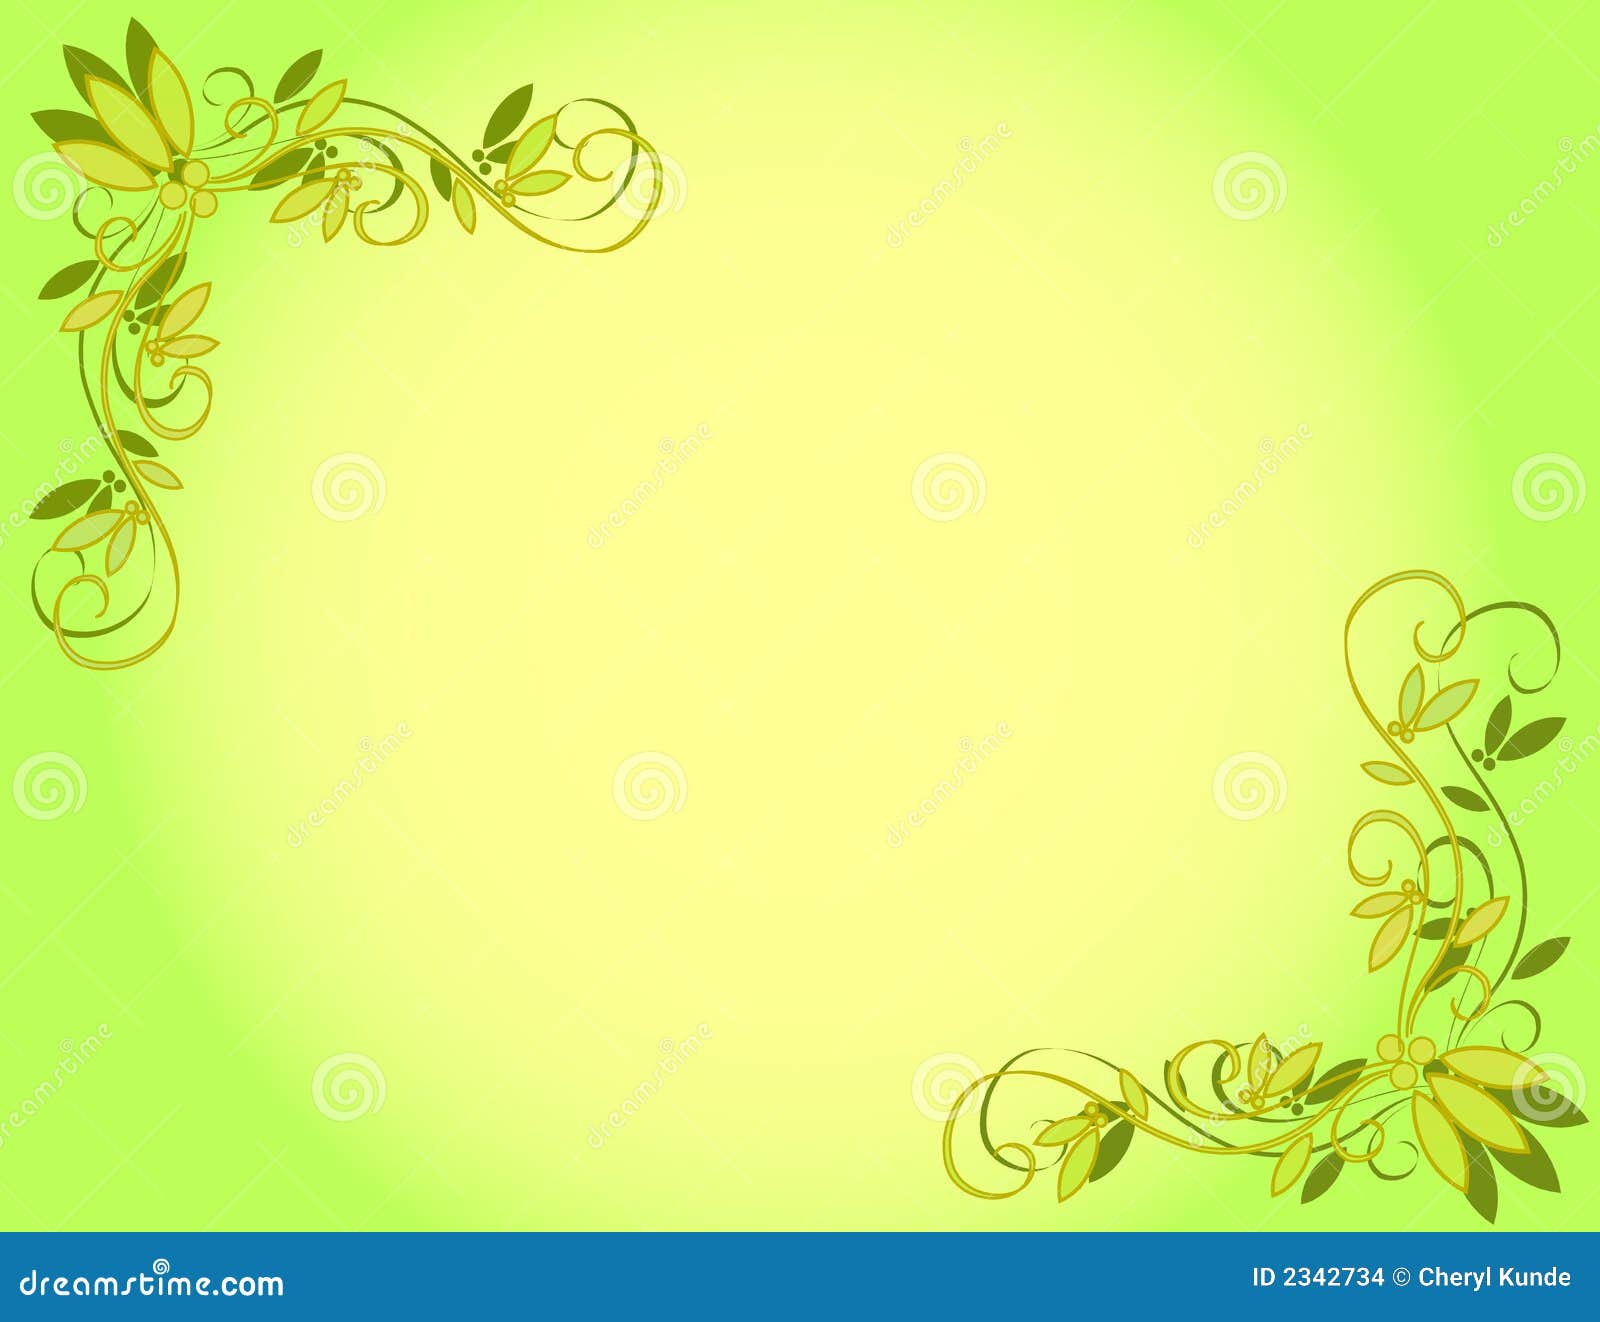 Green Flowers Background Images 33000 Free Banner Background Photos  Download  Lovepik